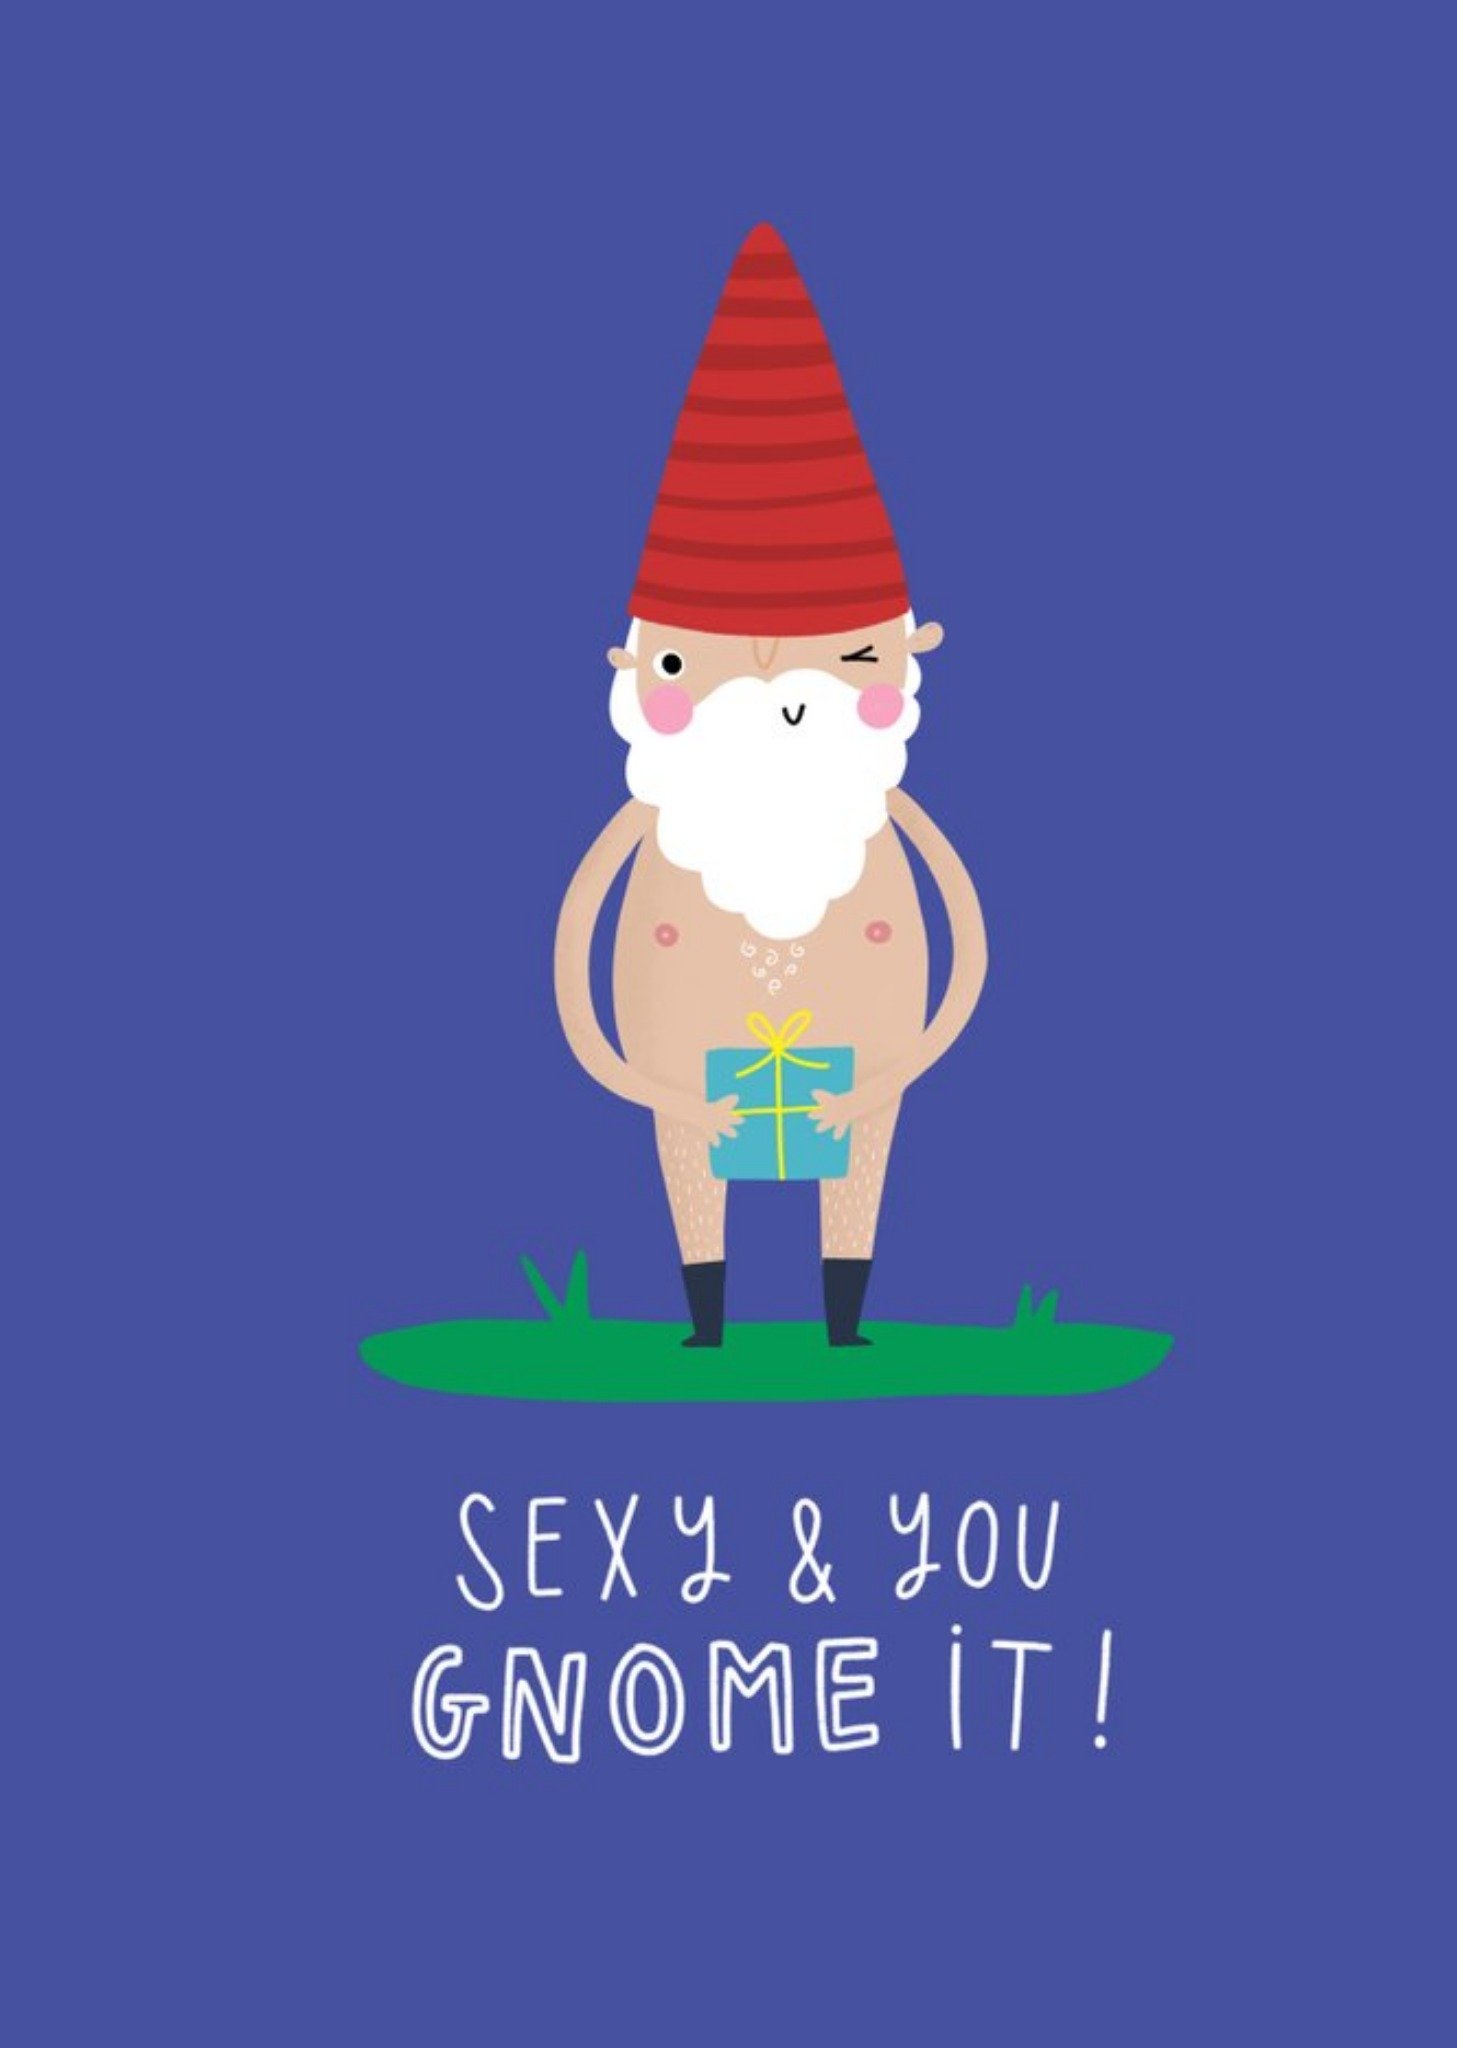 Moonpig Jess Moorhouse Funny Illustrated Sexy Gnome Pun Card Ecard